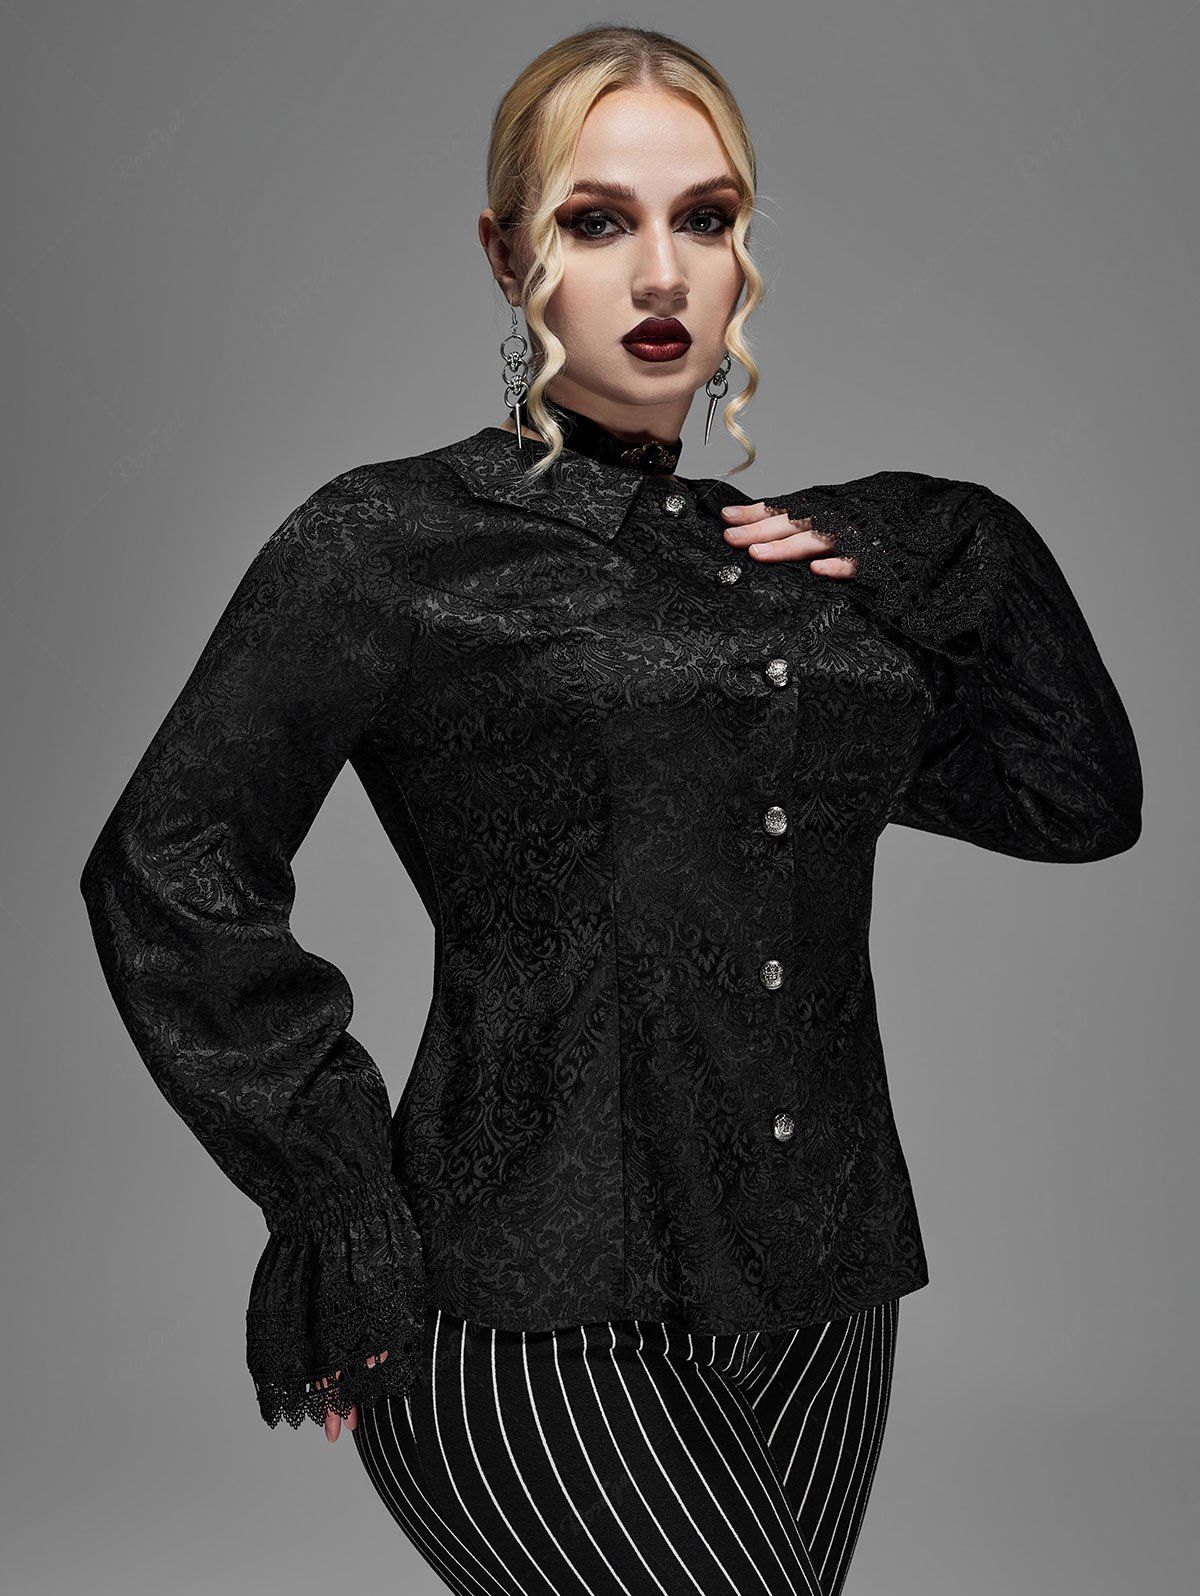 Gothic Floral Embroidered Bat Wing Shape Collar Poet Sleeves Buttons Shirt